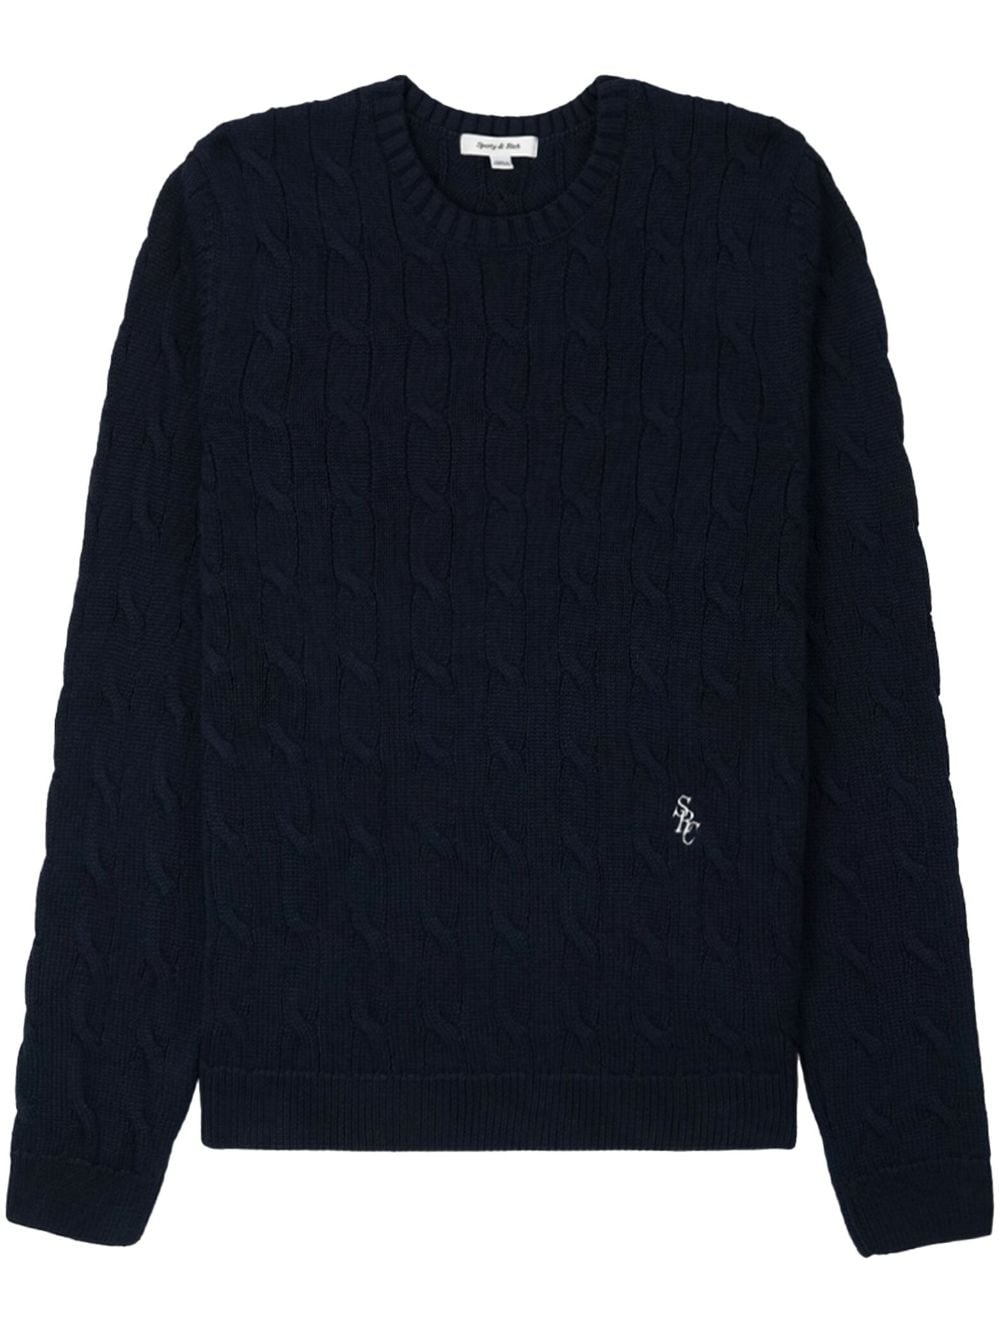 Sporty & Rich embroidered-logo cable knit jumper - Black von Sporty & Rich